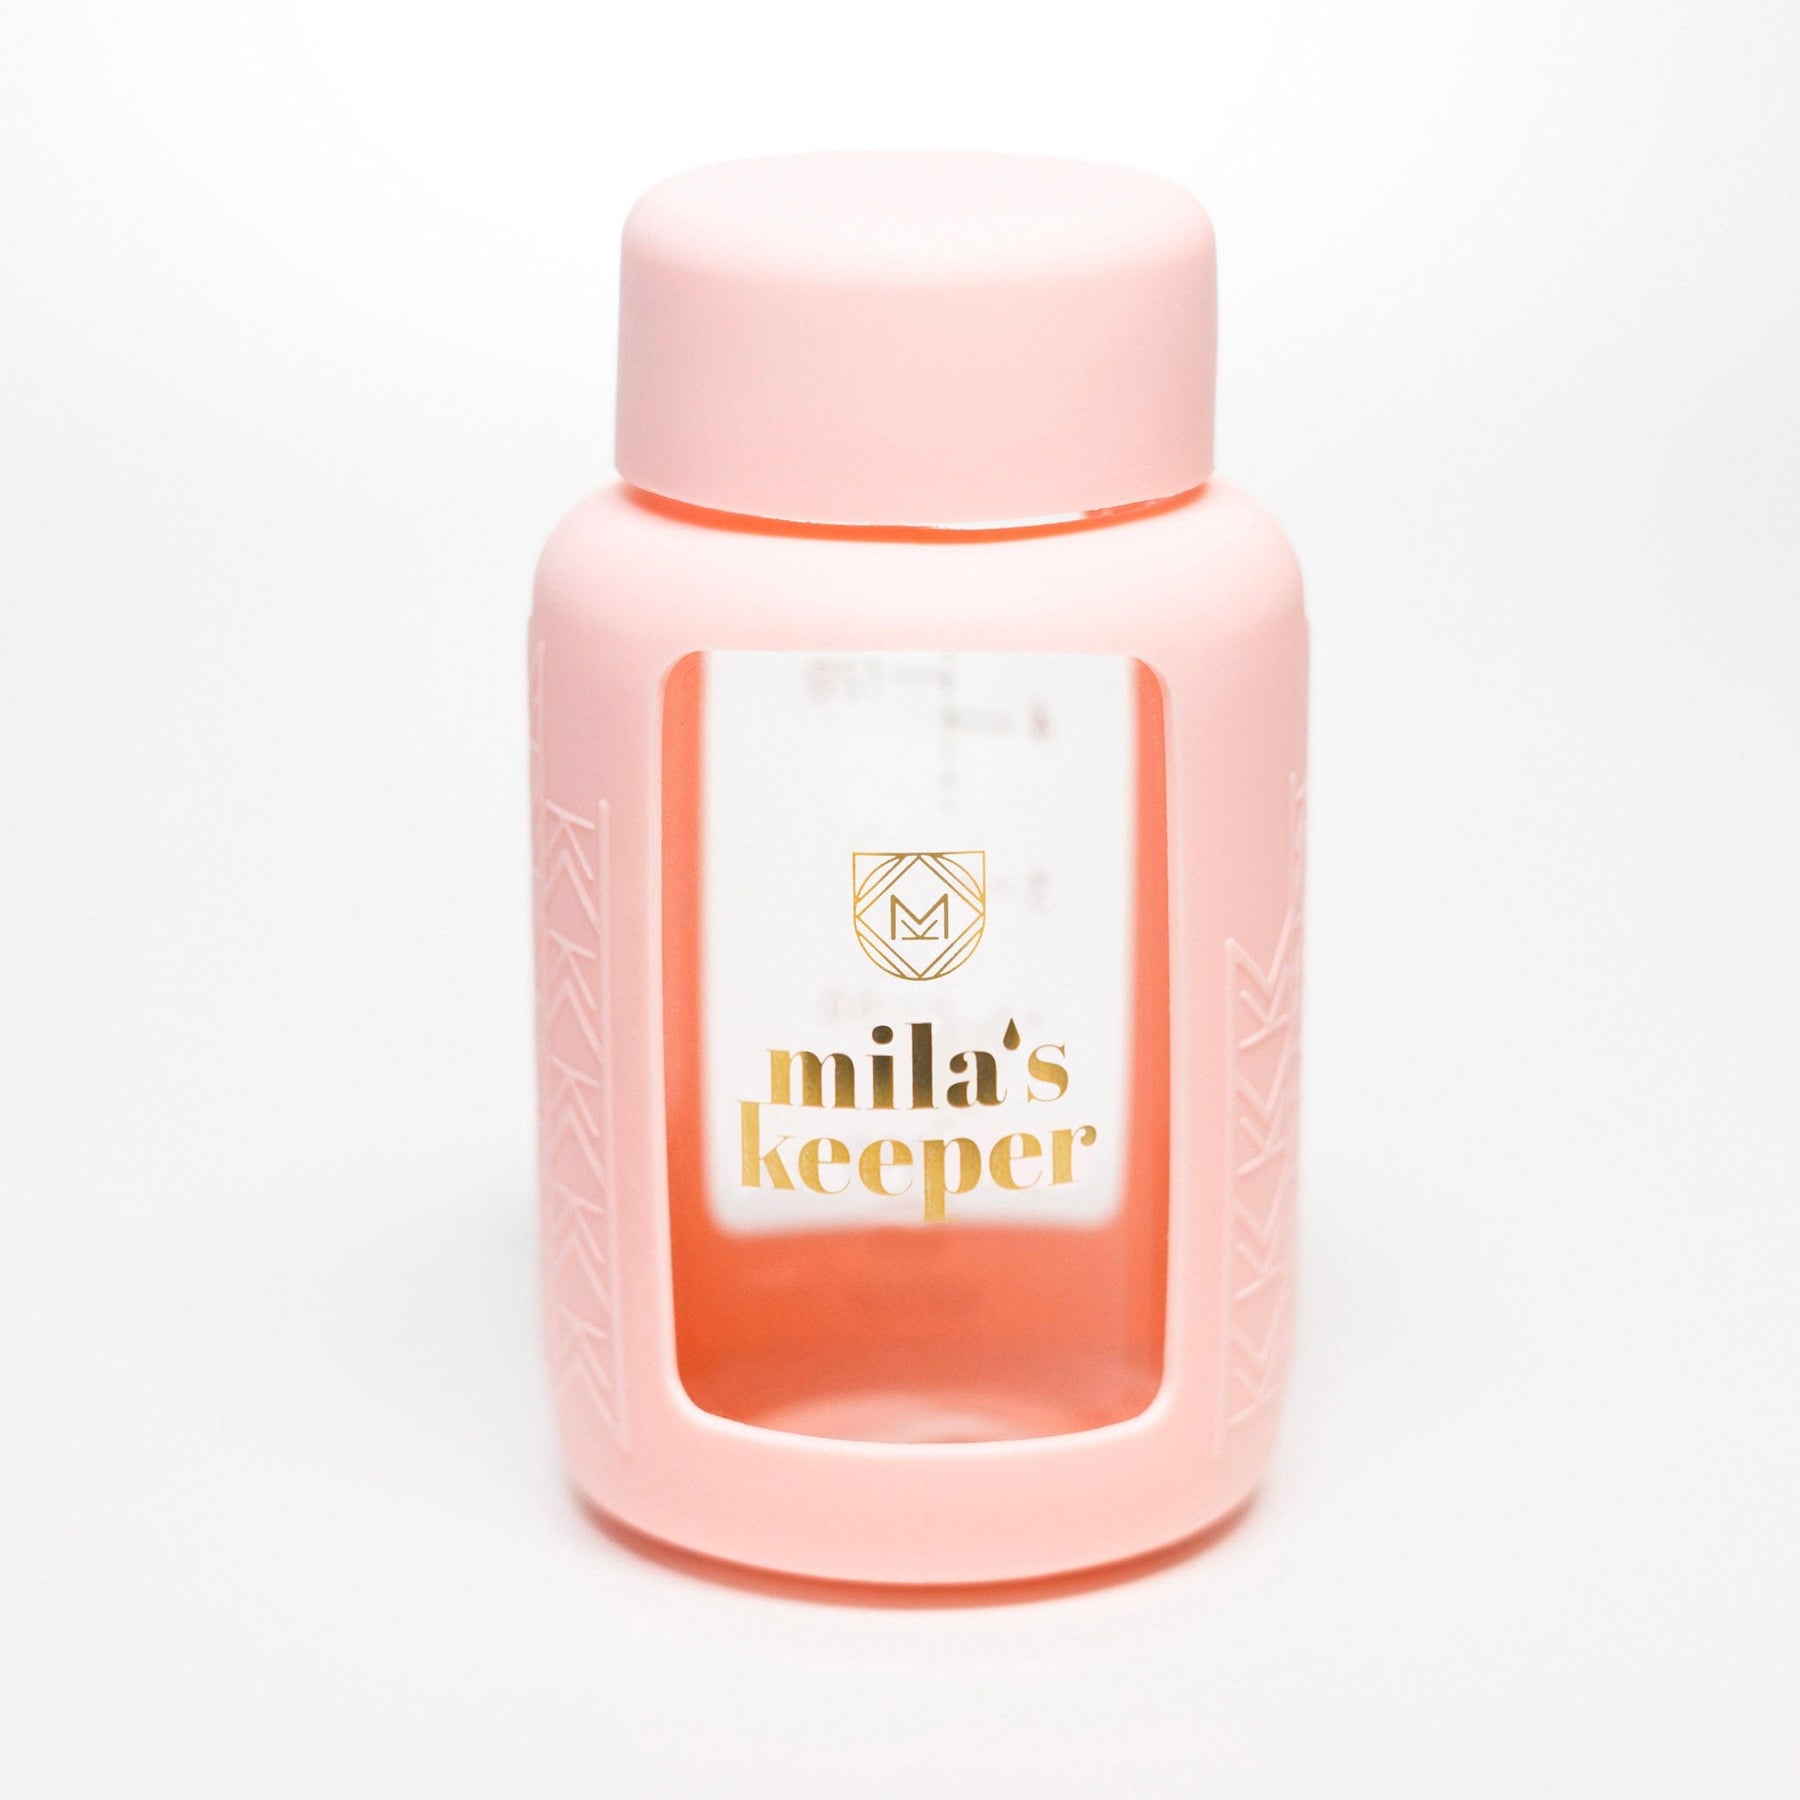 Mila's Keeper Glass Breast Milk Storage Containers Standard Neck / Pink Sands Glass Breast Milk Storage Bottles for-on-the-go-cold-storage-and-pumping